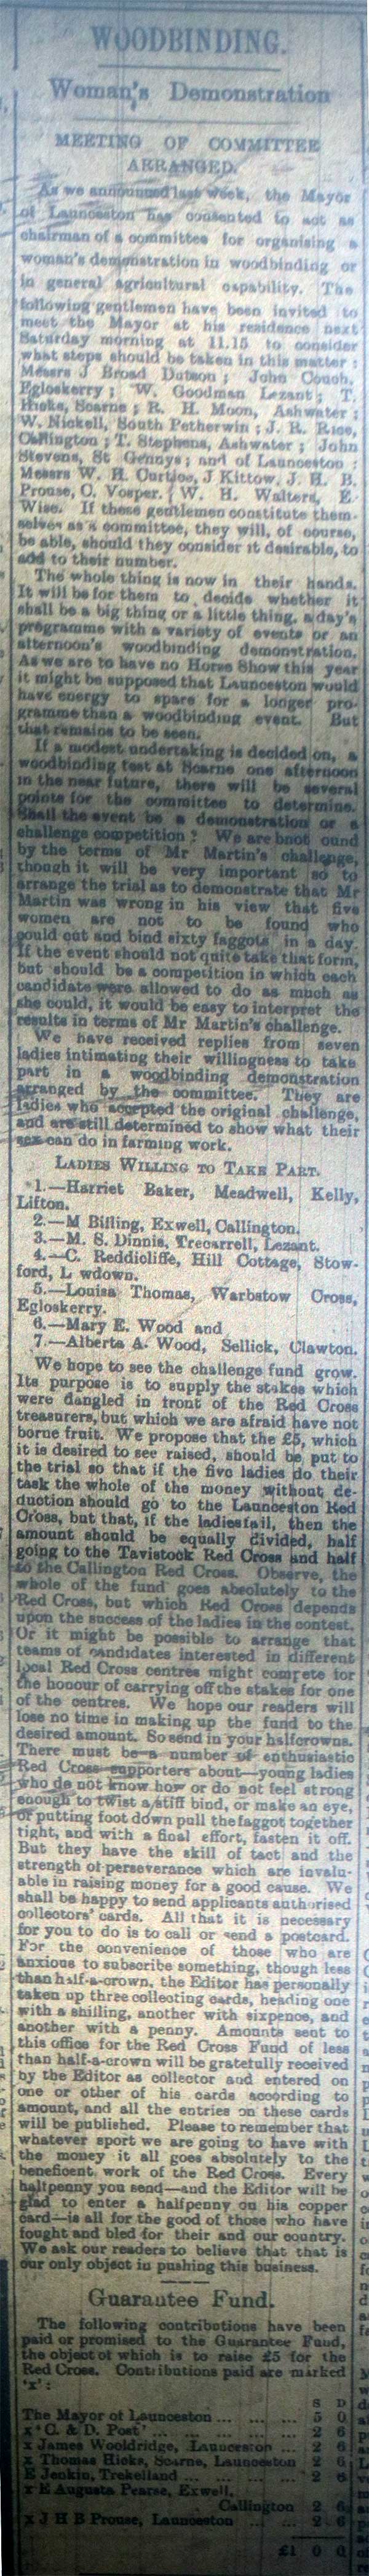 Woodbinding Competition Article February 5th, 1916